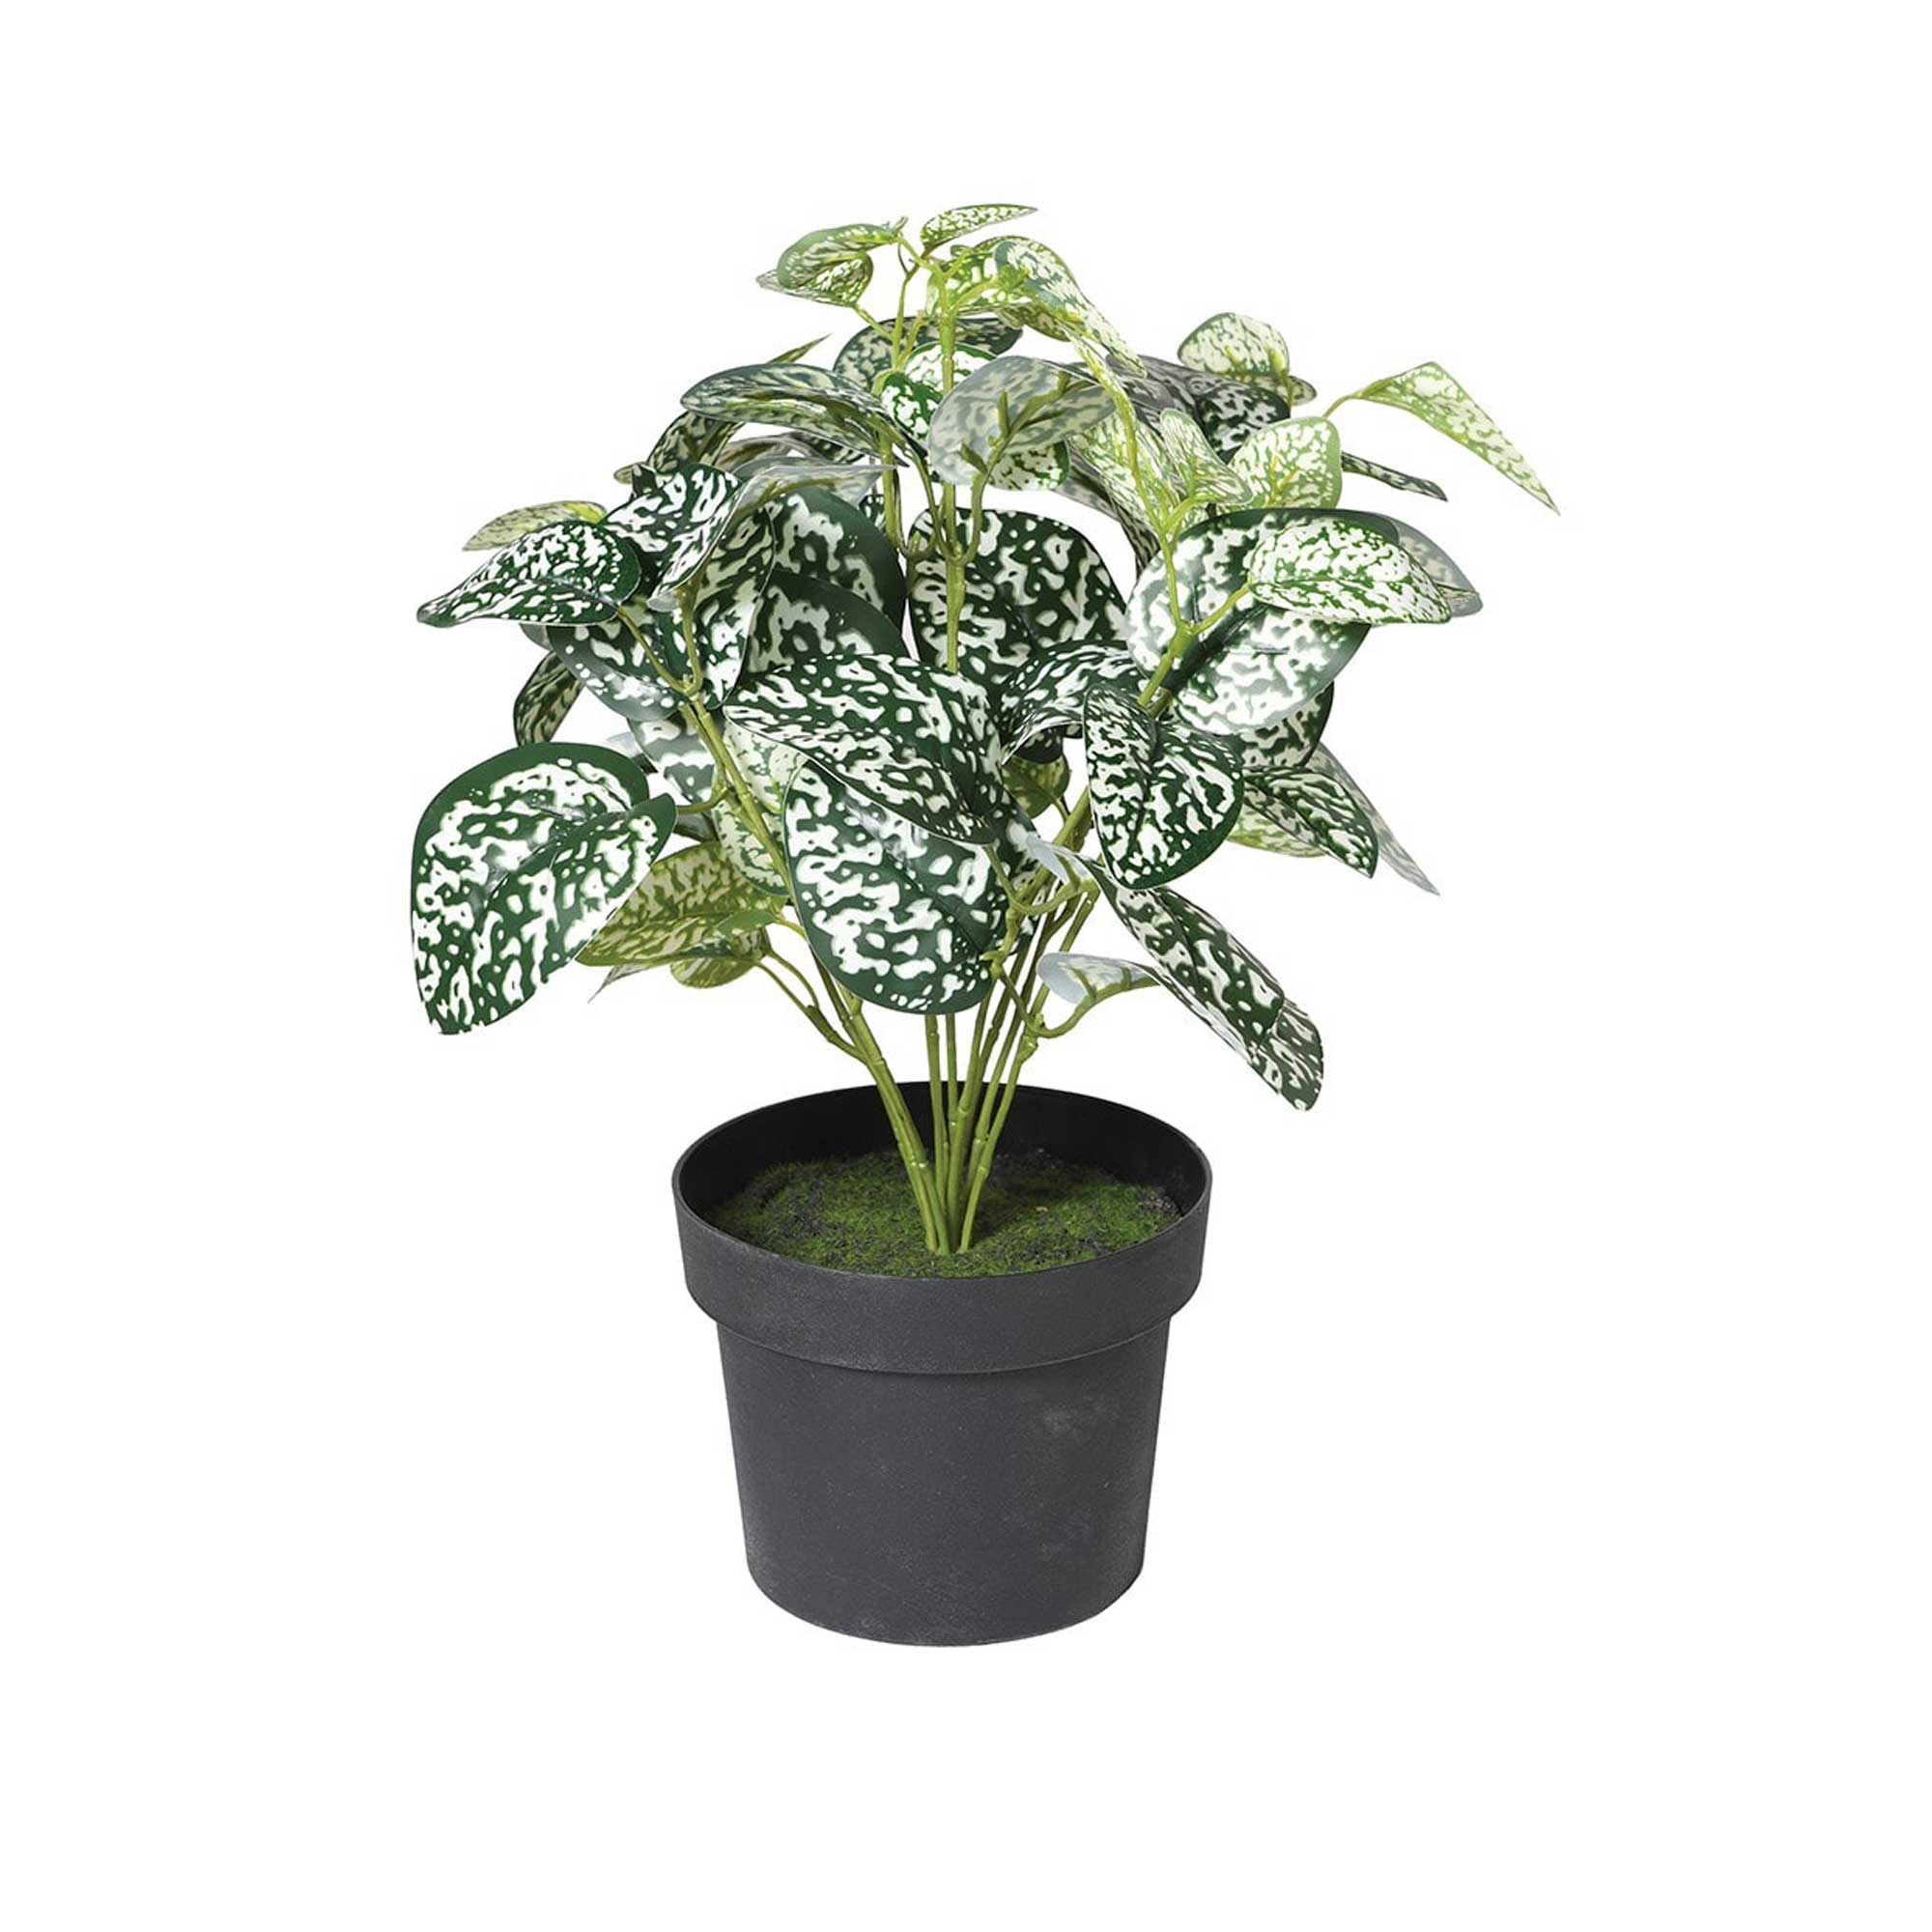 Chinese Evergreen Plant | Barker & Stonehouse